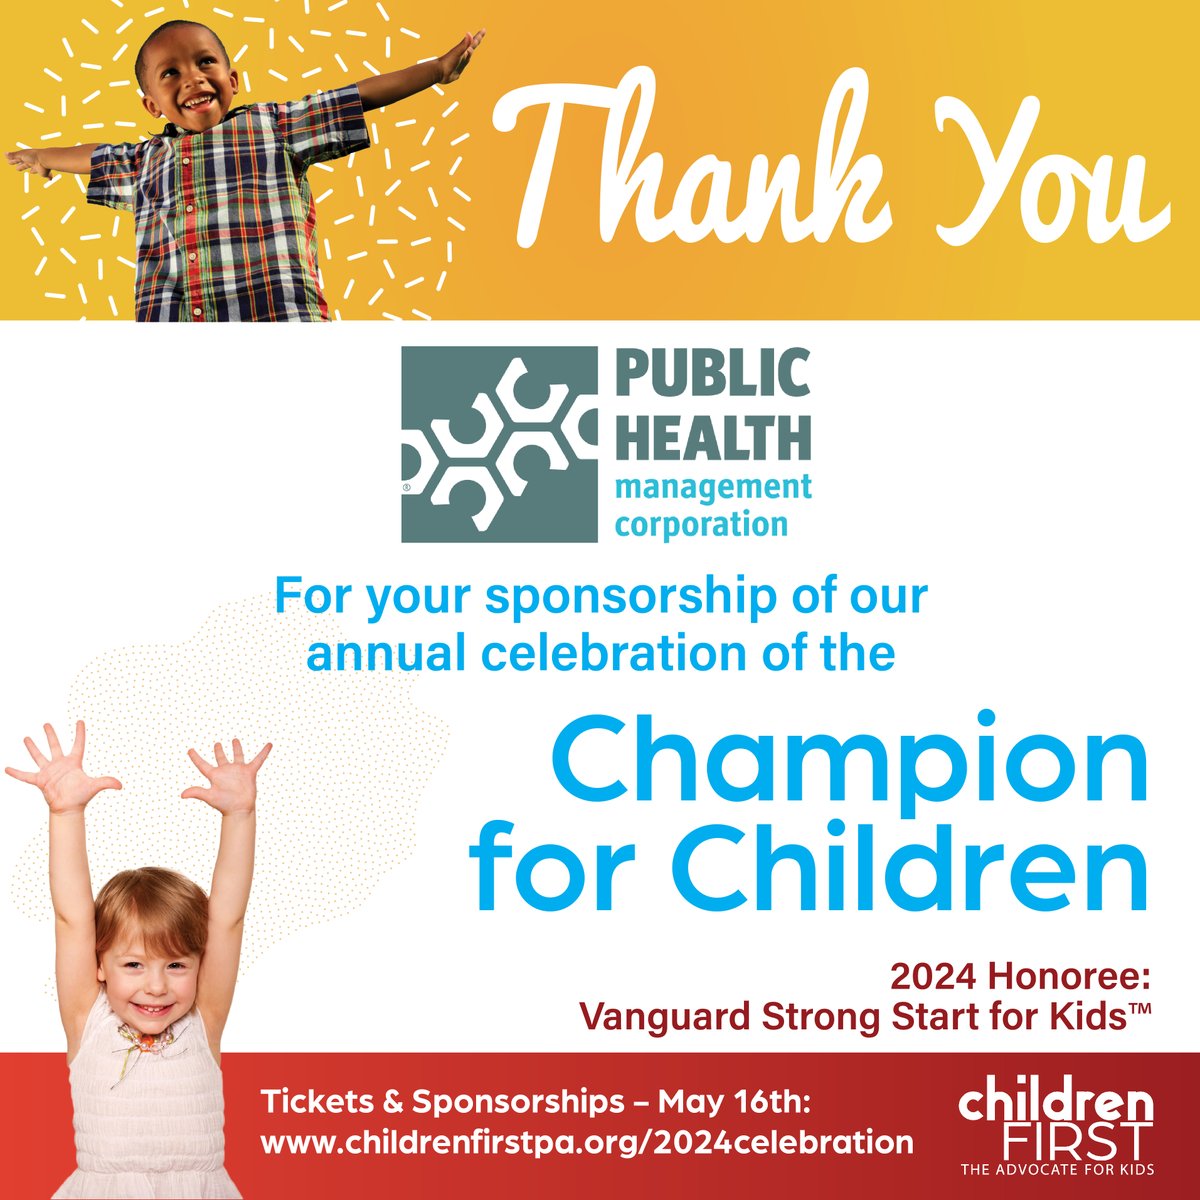 Thanks to @PHMCtweets for their commitment to children's well-being & their sponsorship. Looking forward to Thursday's celebration - everyone is invited! Get your ticket at childrenfirstpa.org/2024celebration. #ChampionforChildren #ChampionsforChildren #childhealth #childwellbeing